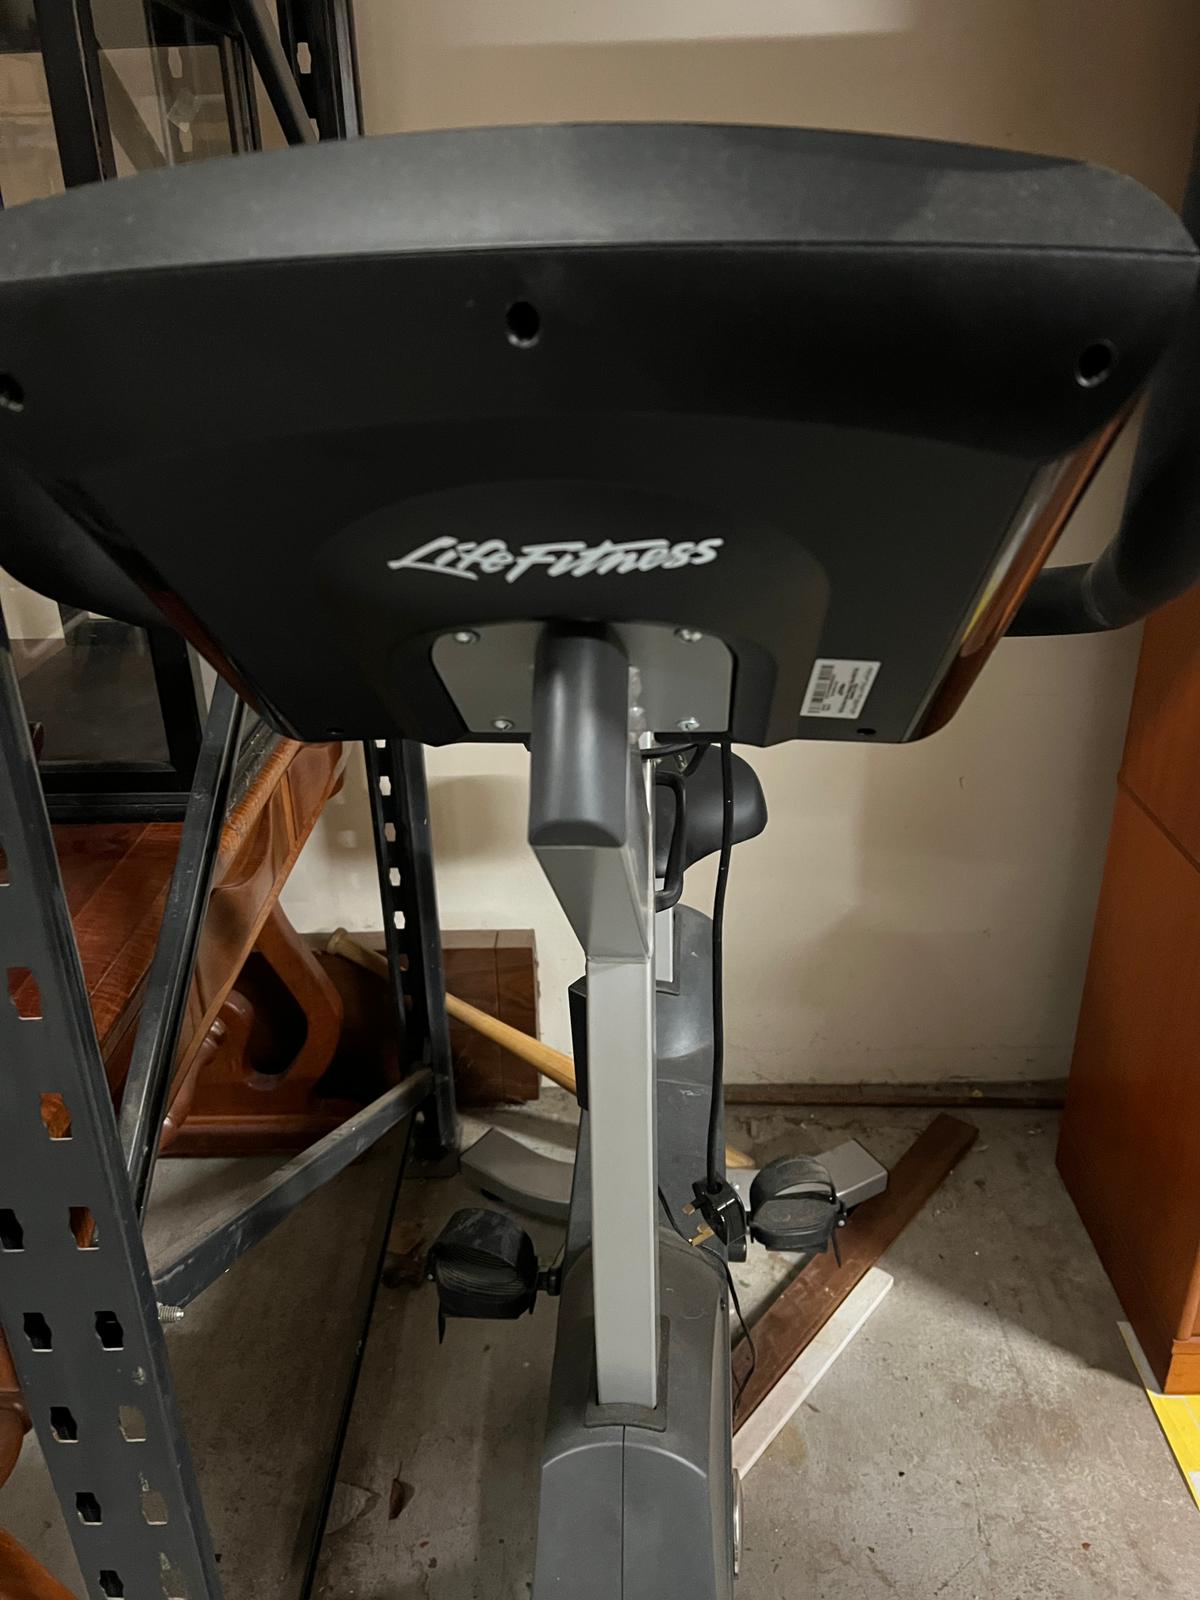 A Life Fitness C1 exercise bike with Go Console - Image 5 of 7